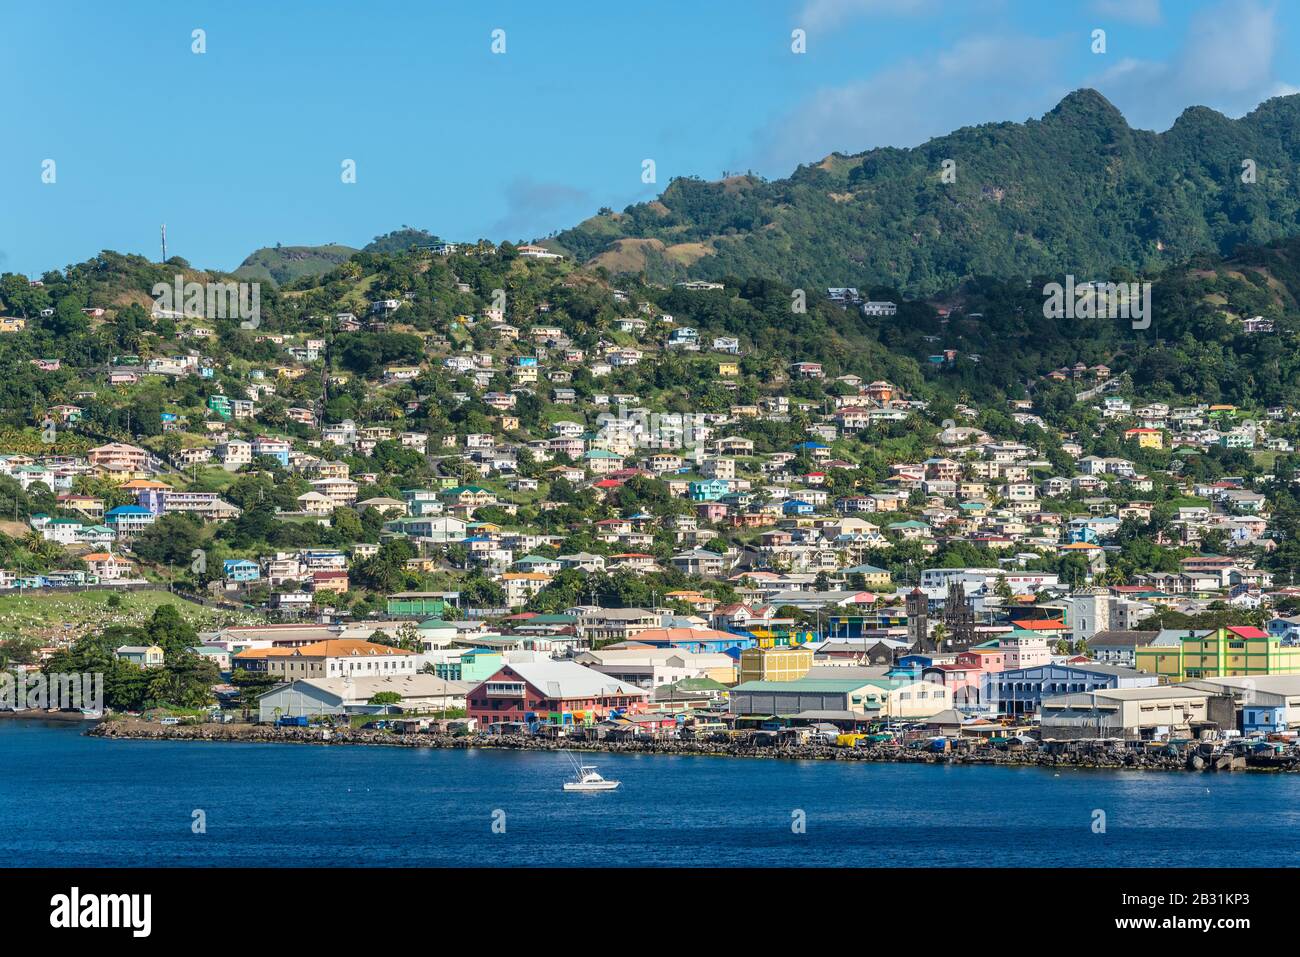 Kingstown, Saint Vincent and the Grenadines - December 19, 2018: Kingstown panoramic view from the sea in Saint Vincent and the Grenadines. Stock Photo